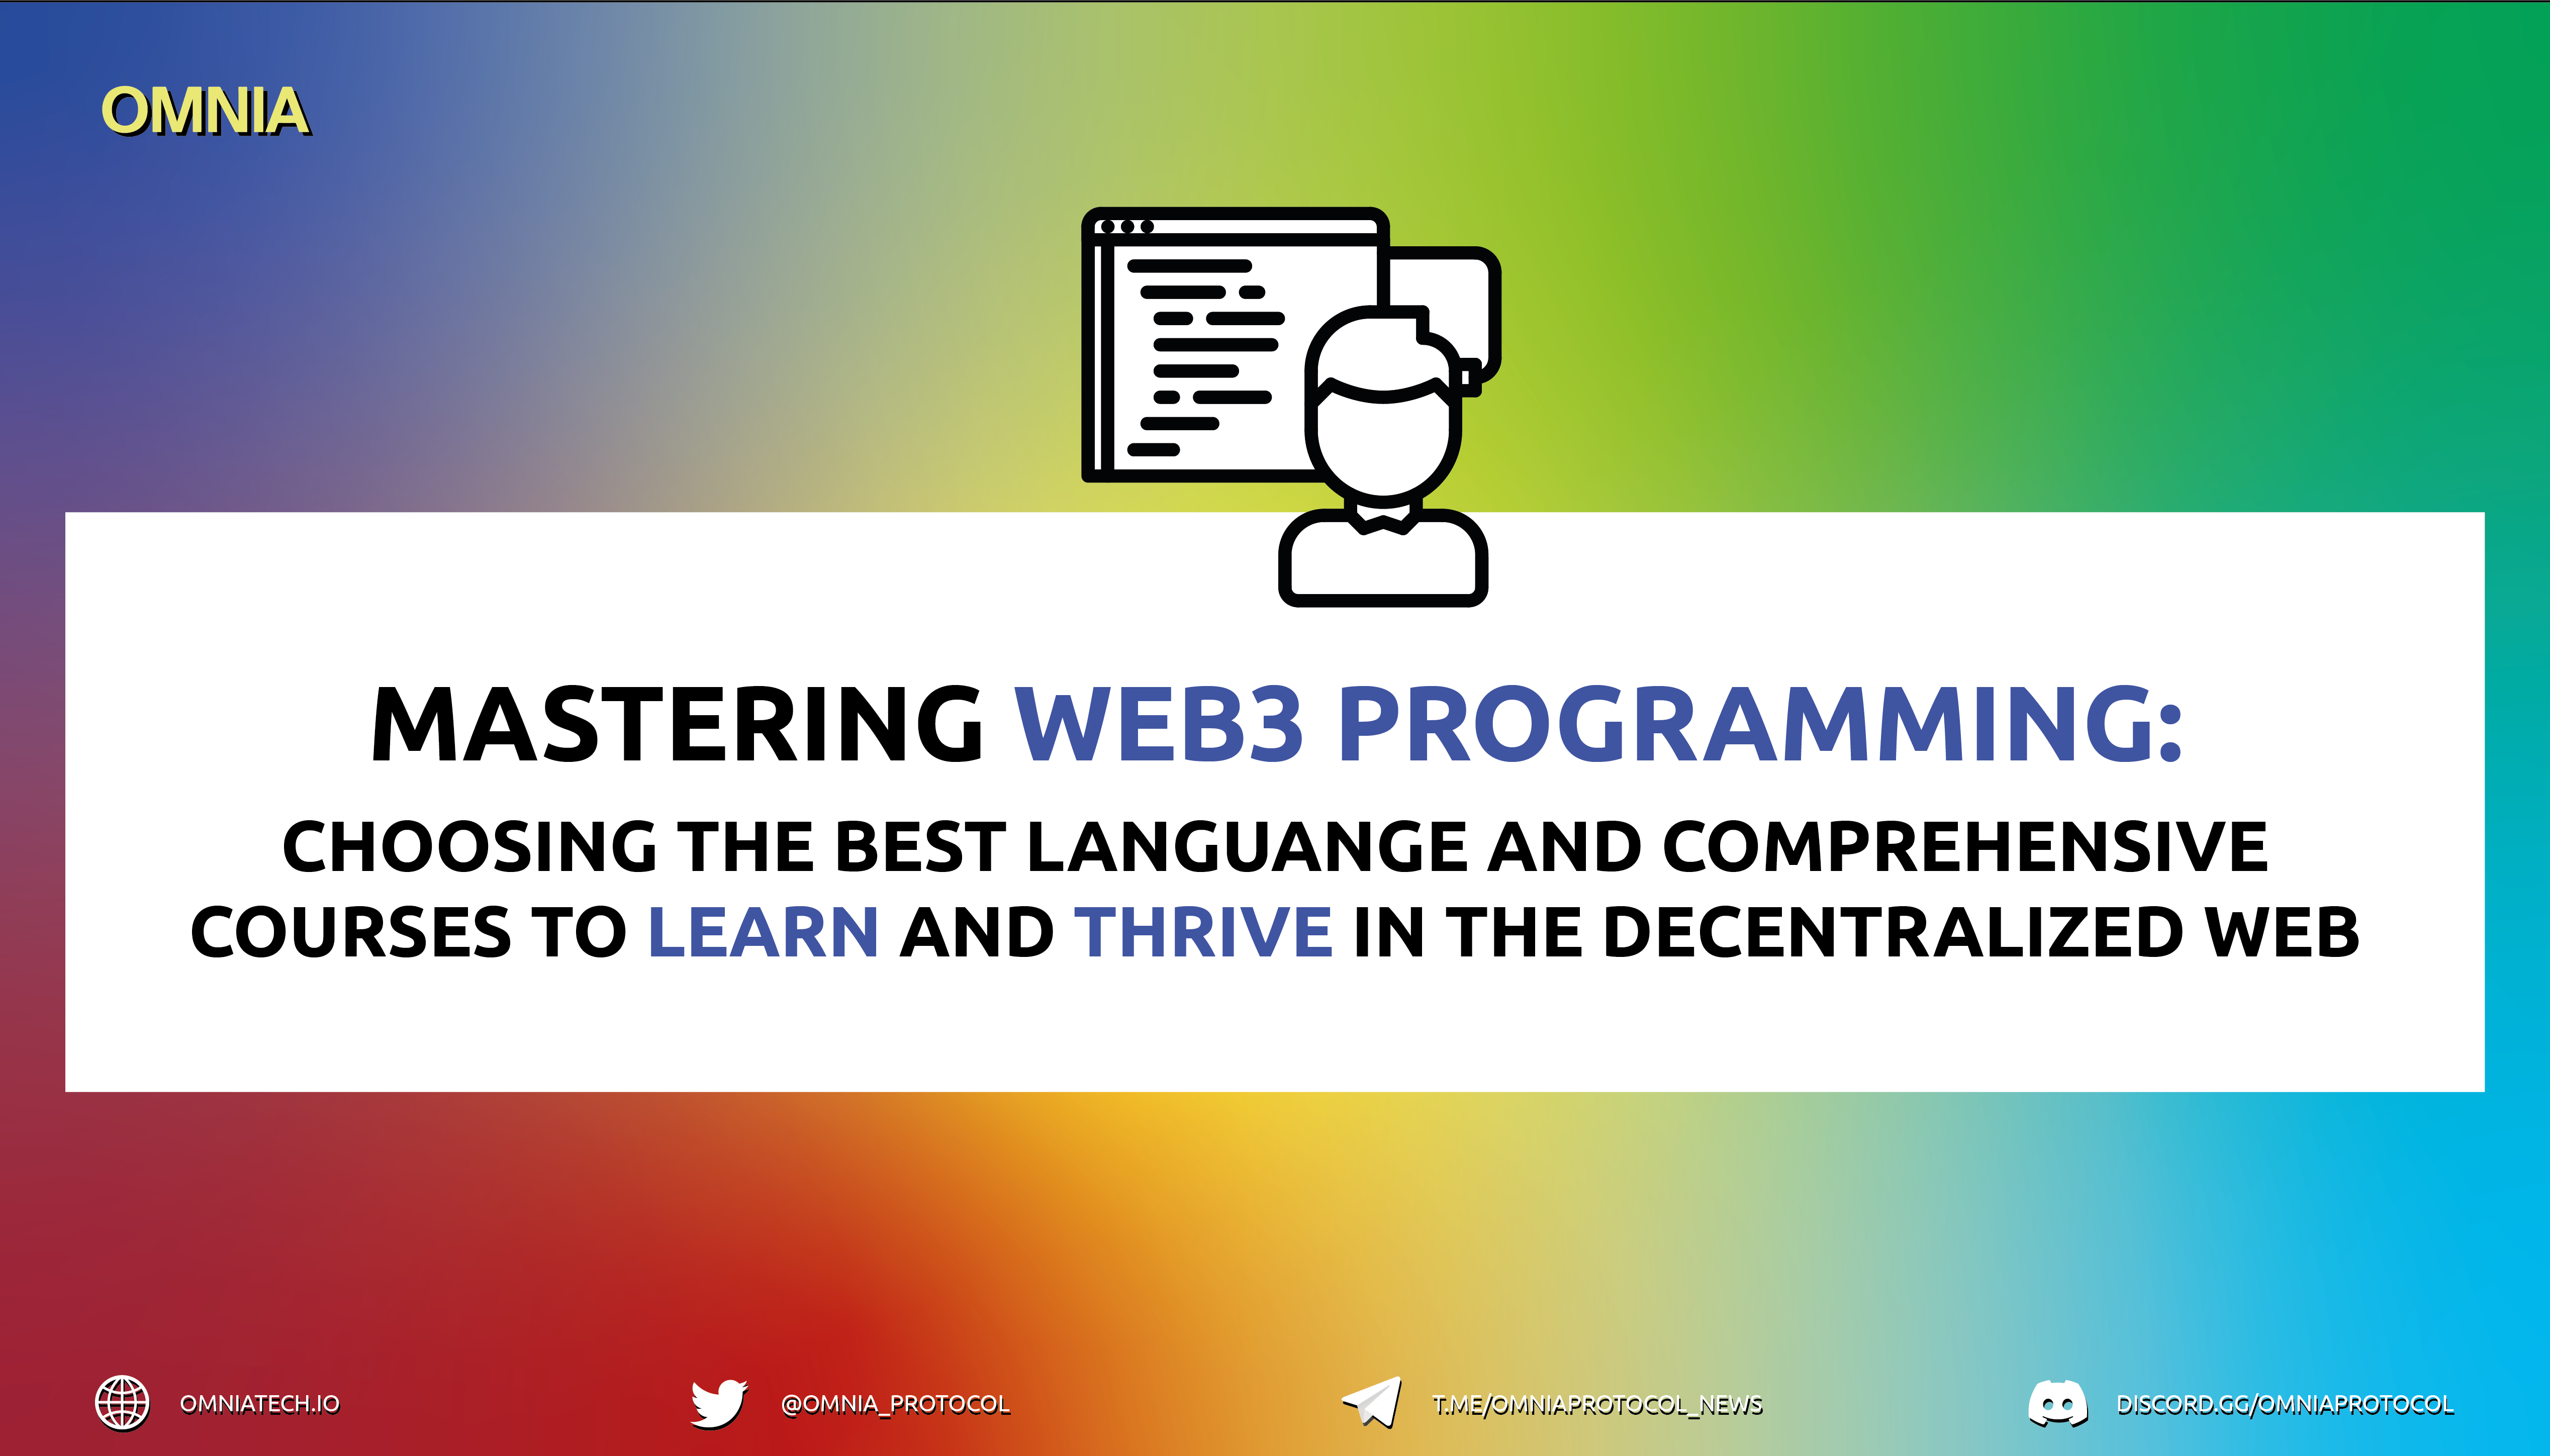 Mastering Web3 Programming: Choosing the Best Language and Comprehensive Courses to Learn and Thrive in the Decentralized Web